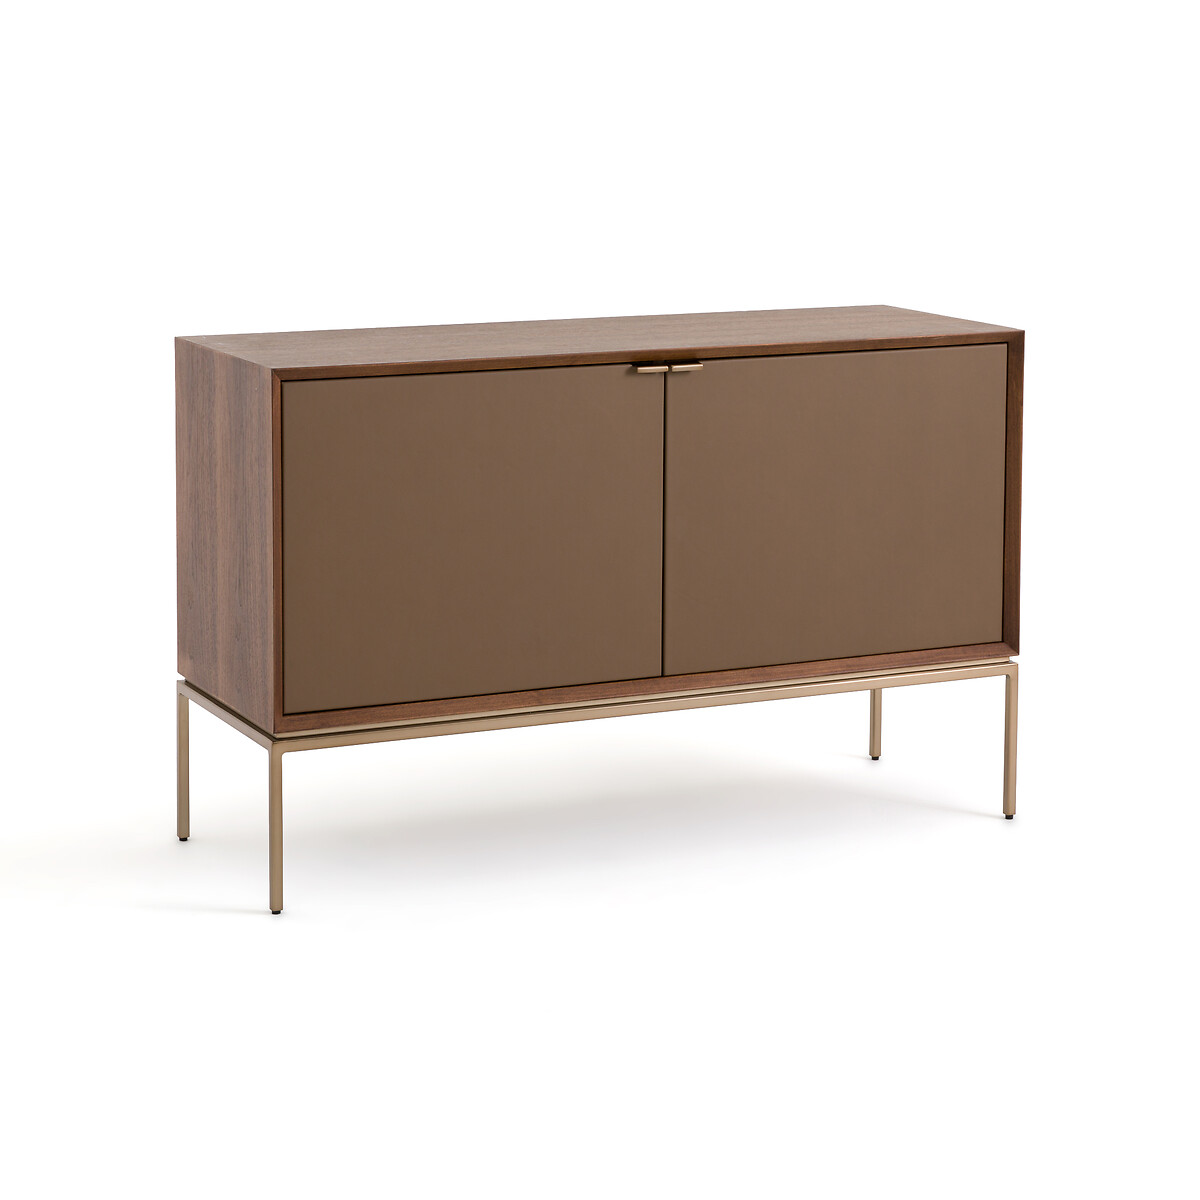 Delina Walnut and Leather XS Sideboard